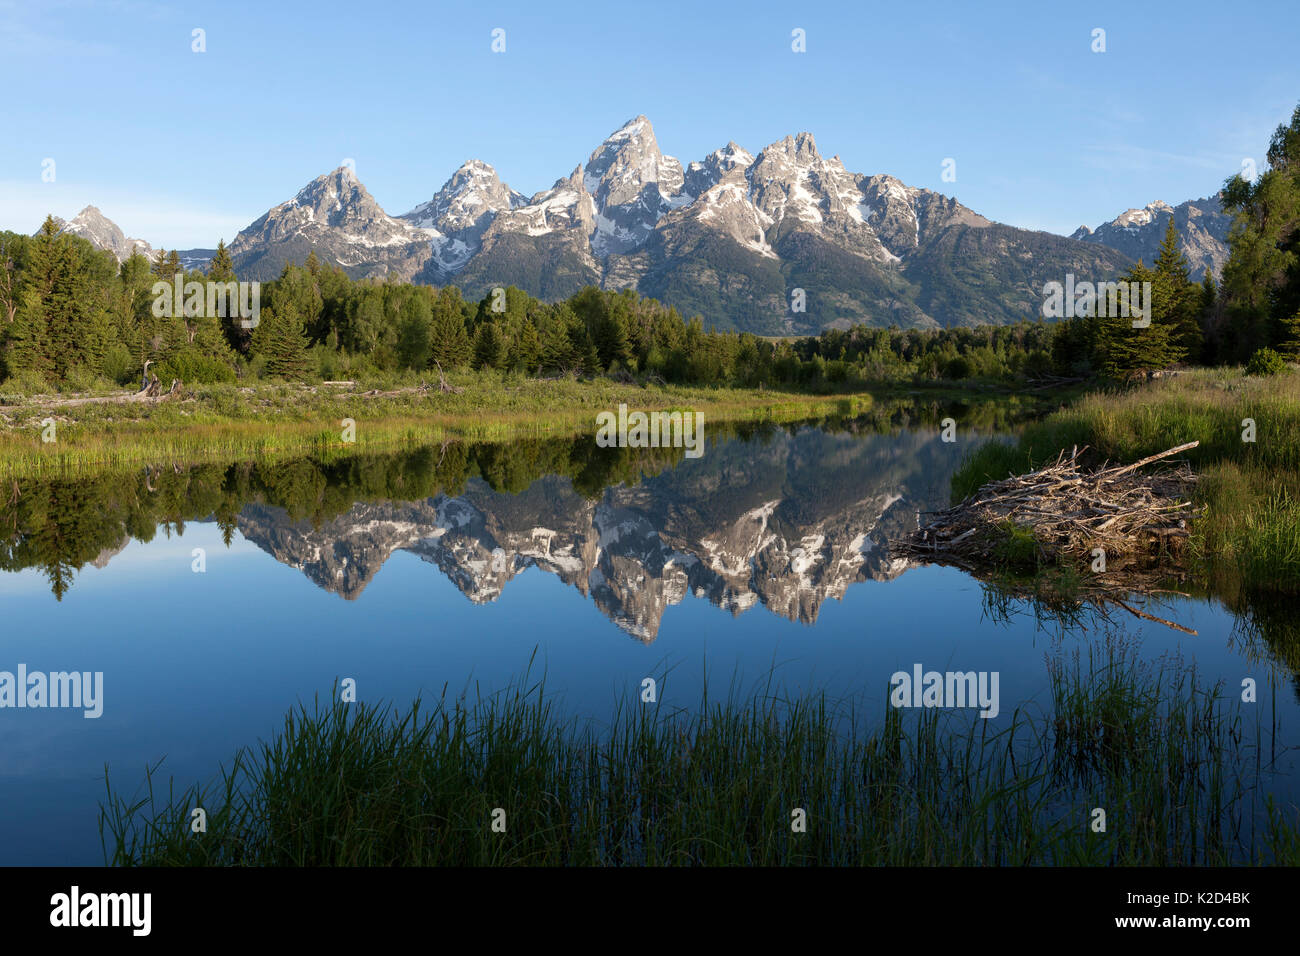 The Grand Teton and the Teton Range reflected in the calm waters of the Snake River, Schwabacher Landing, Grand Teton National Park, Wyoming, USA, June. Stock Photo